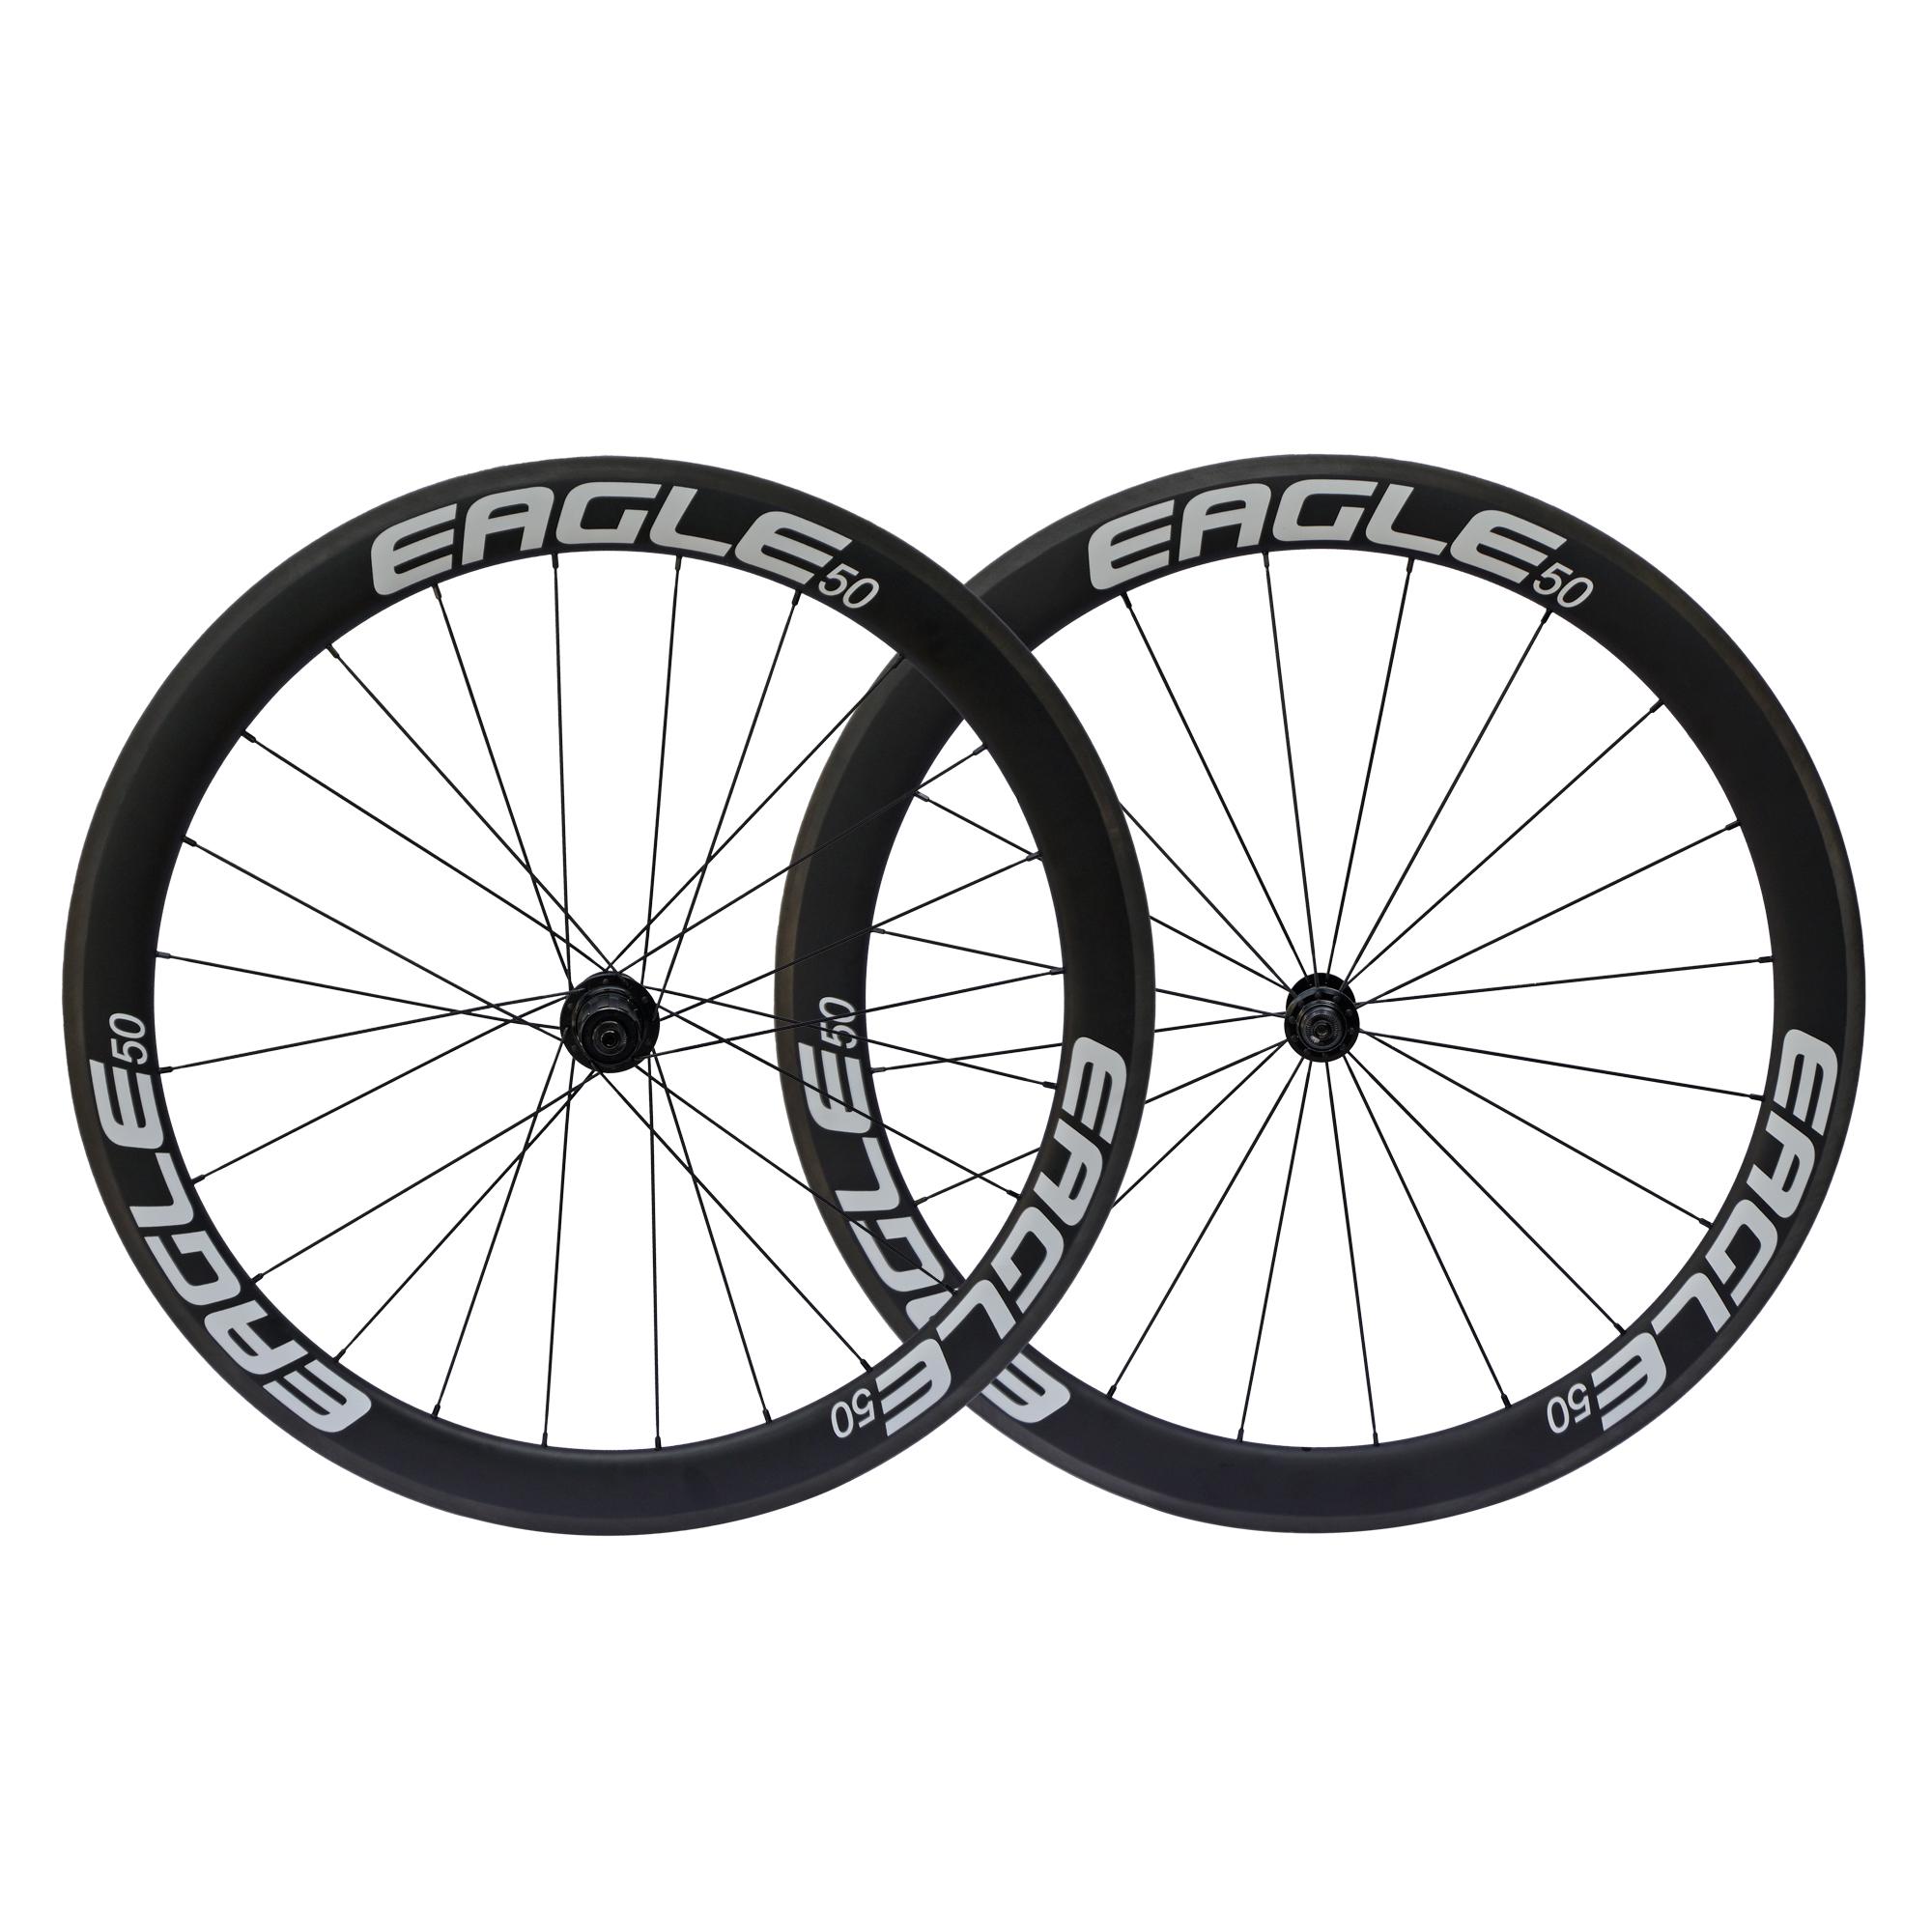 Eagle Bicycles Carbon Road Wheelset for Rim Brakes - White graphics